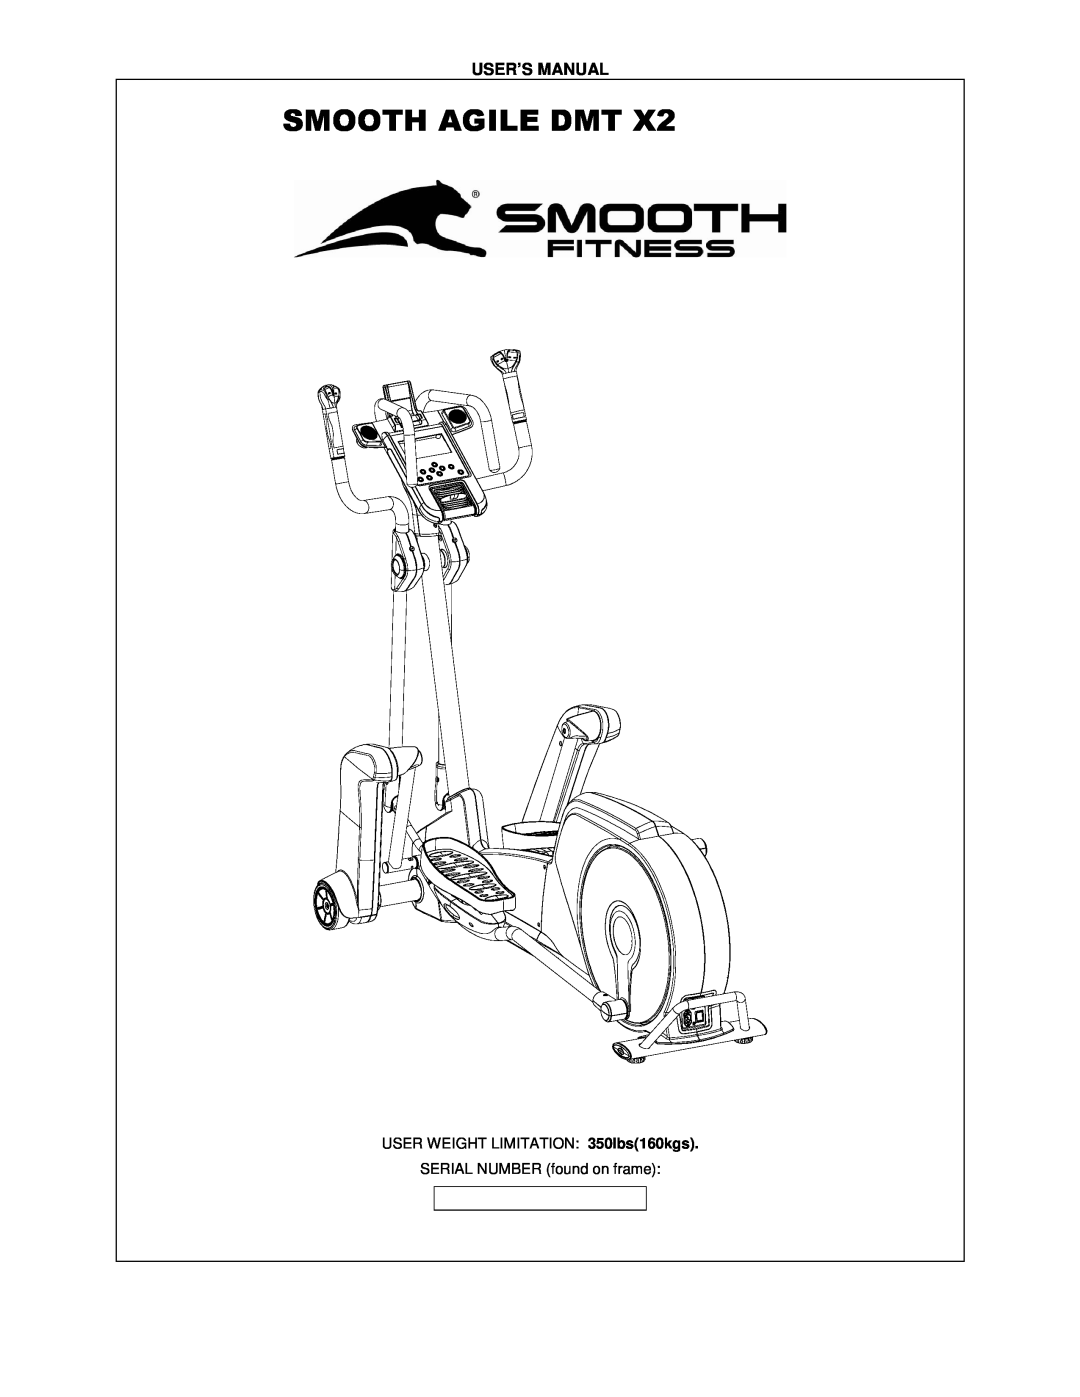 Smooth Fitness DMT X2 user manual Smooth Agile Dmt, User’S Manual 